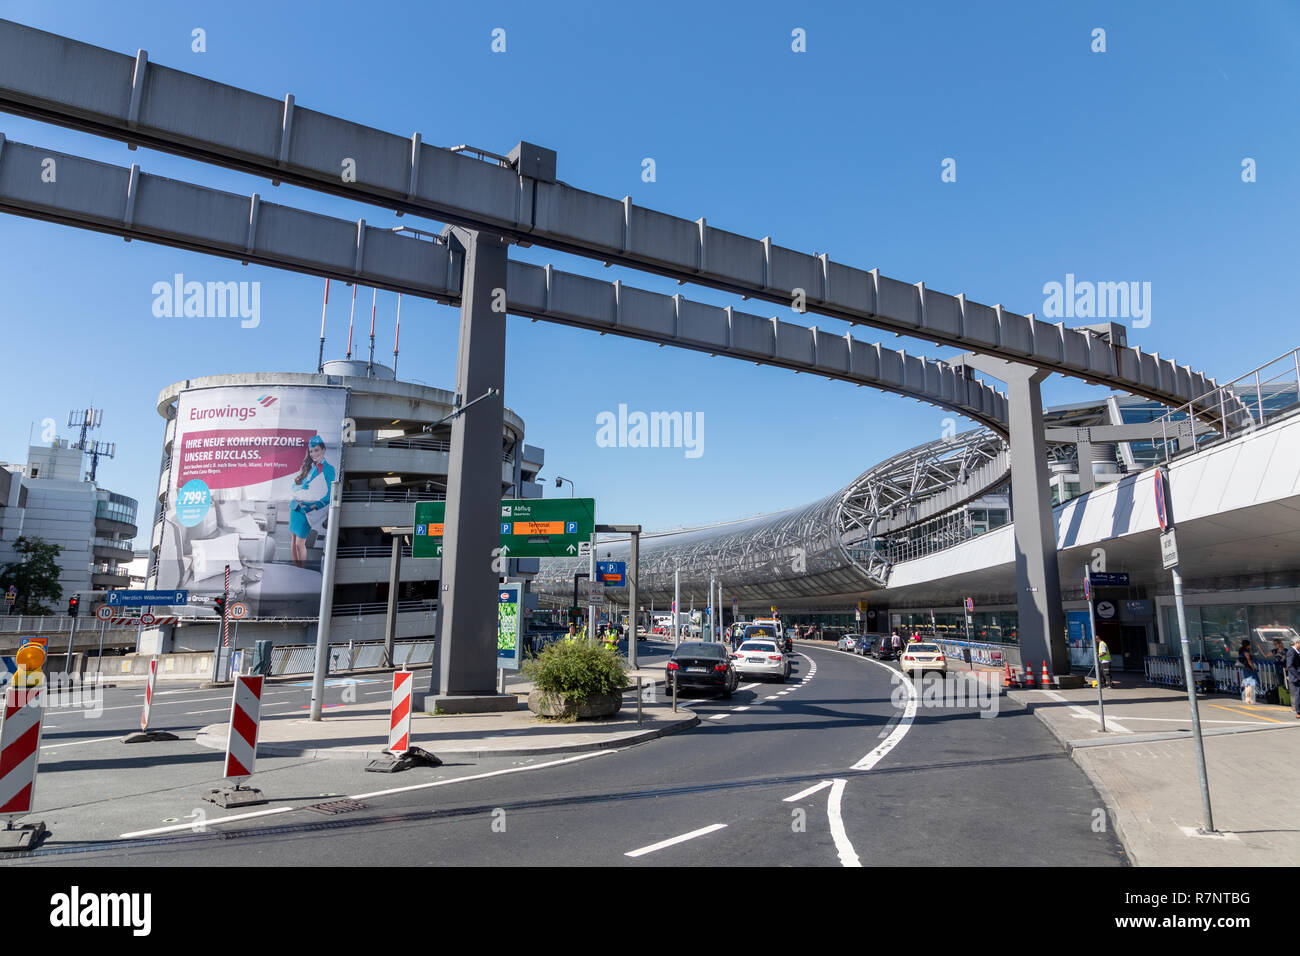 Dusseldorf, Germany - July 3, 2018: exterior view of Dusseldorf International Airport. Dusseldorf Airport located approximately 7 kilometres north of  Stock Photo